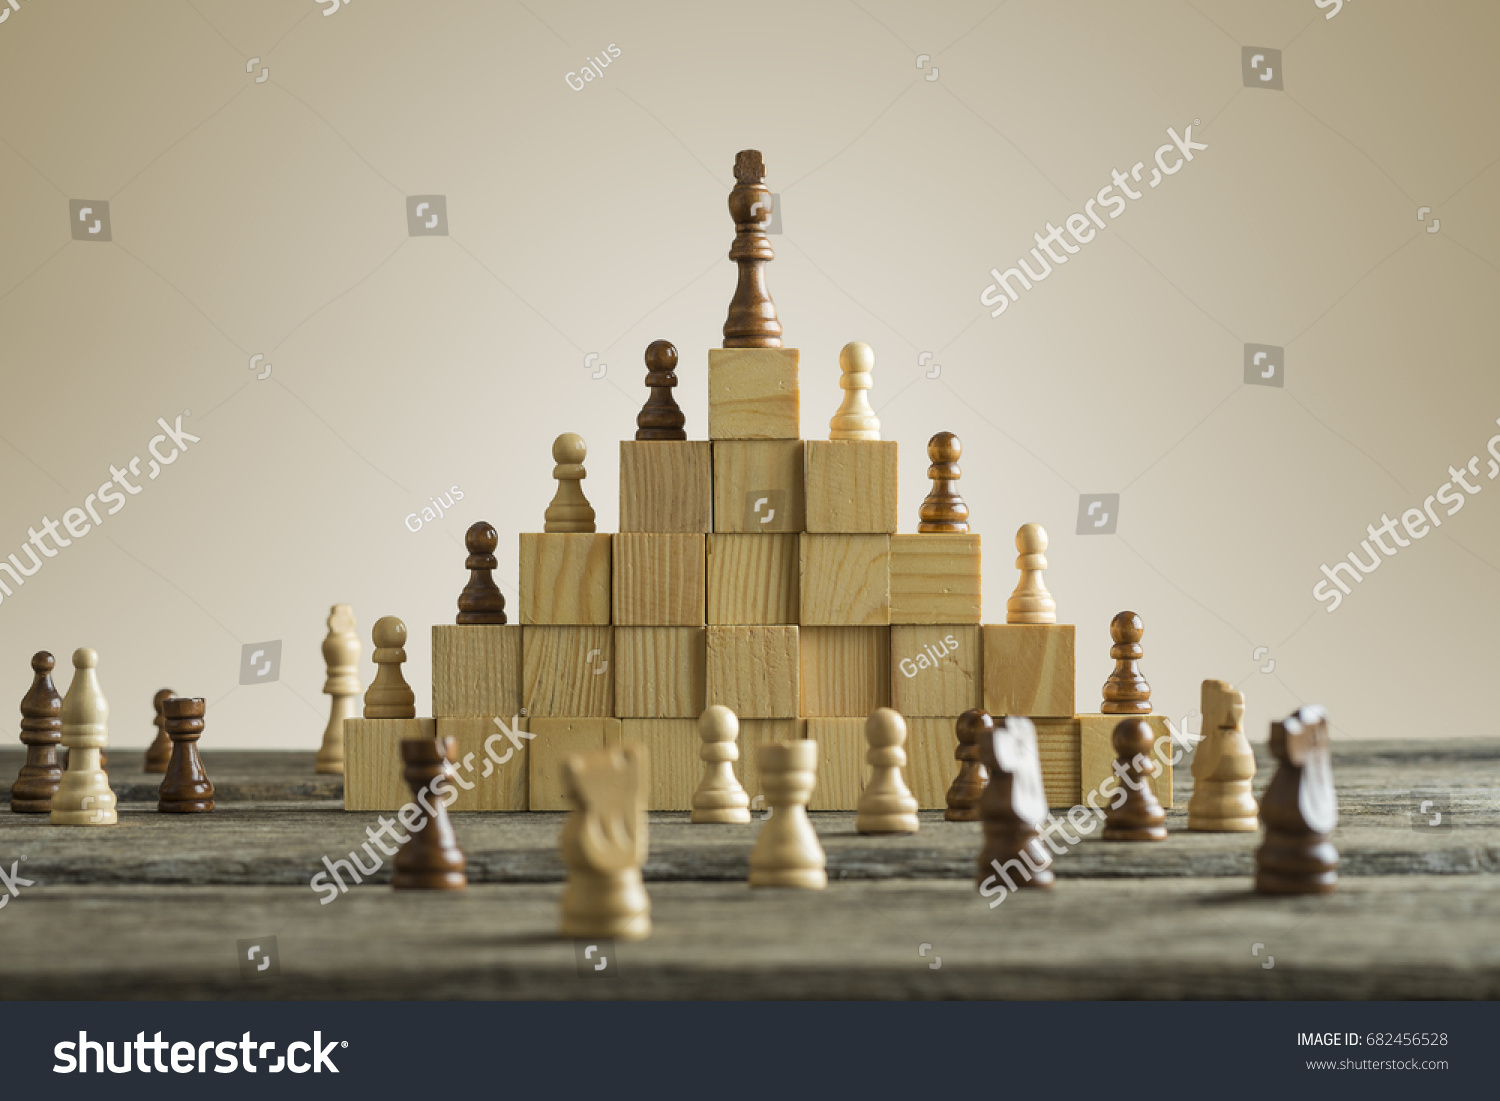 Business hierarchy; ranking and strategy concept with chess pieces standing on a pyramid of wooden building blocks with the king at the top with copy space. #682456528